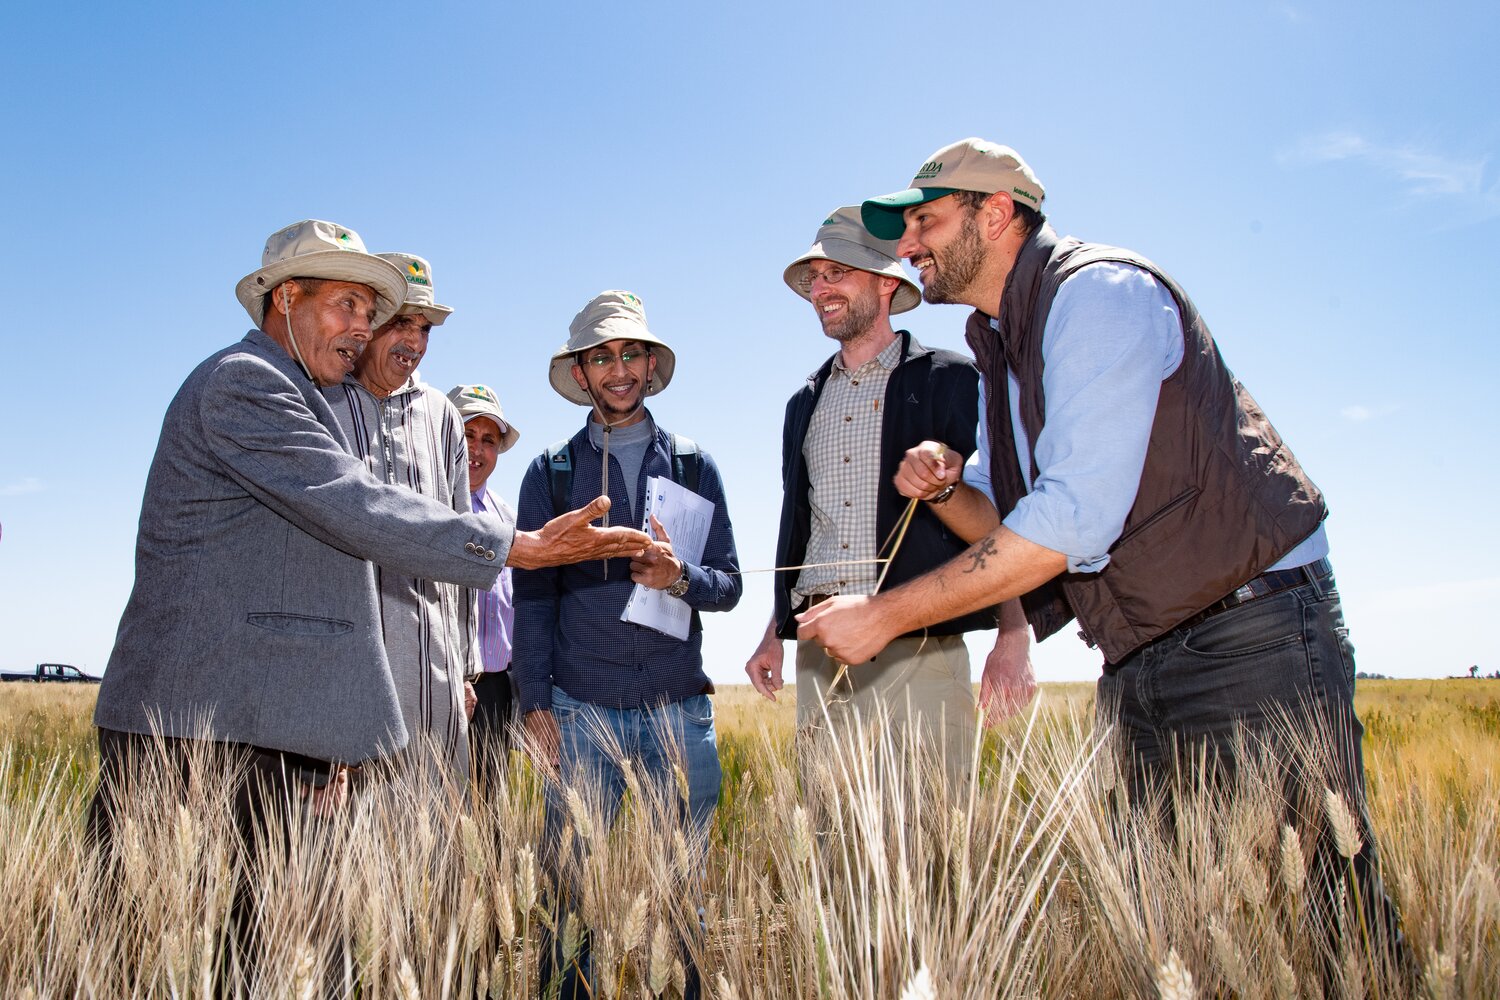 ICARDA scientists working in the DIIVA Project visit on-farm trials near Marchouch, Morocco to gather opinions of farmers about CWR-derived durum wheat lines. Photo: Michael Major/Crop Trust